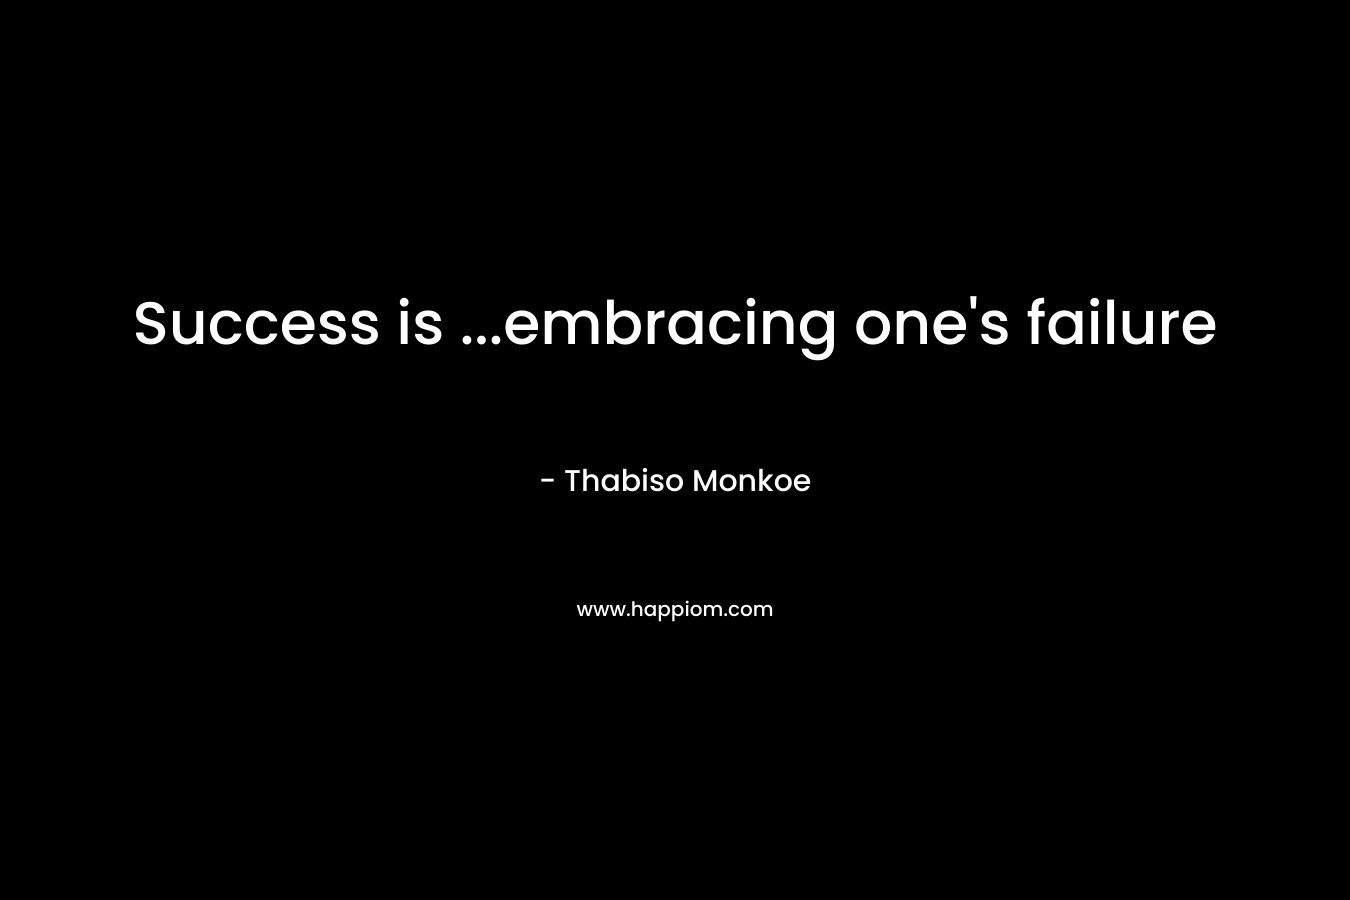 Success is ...embracing one's failure